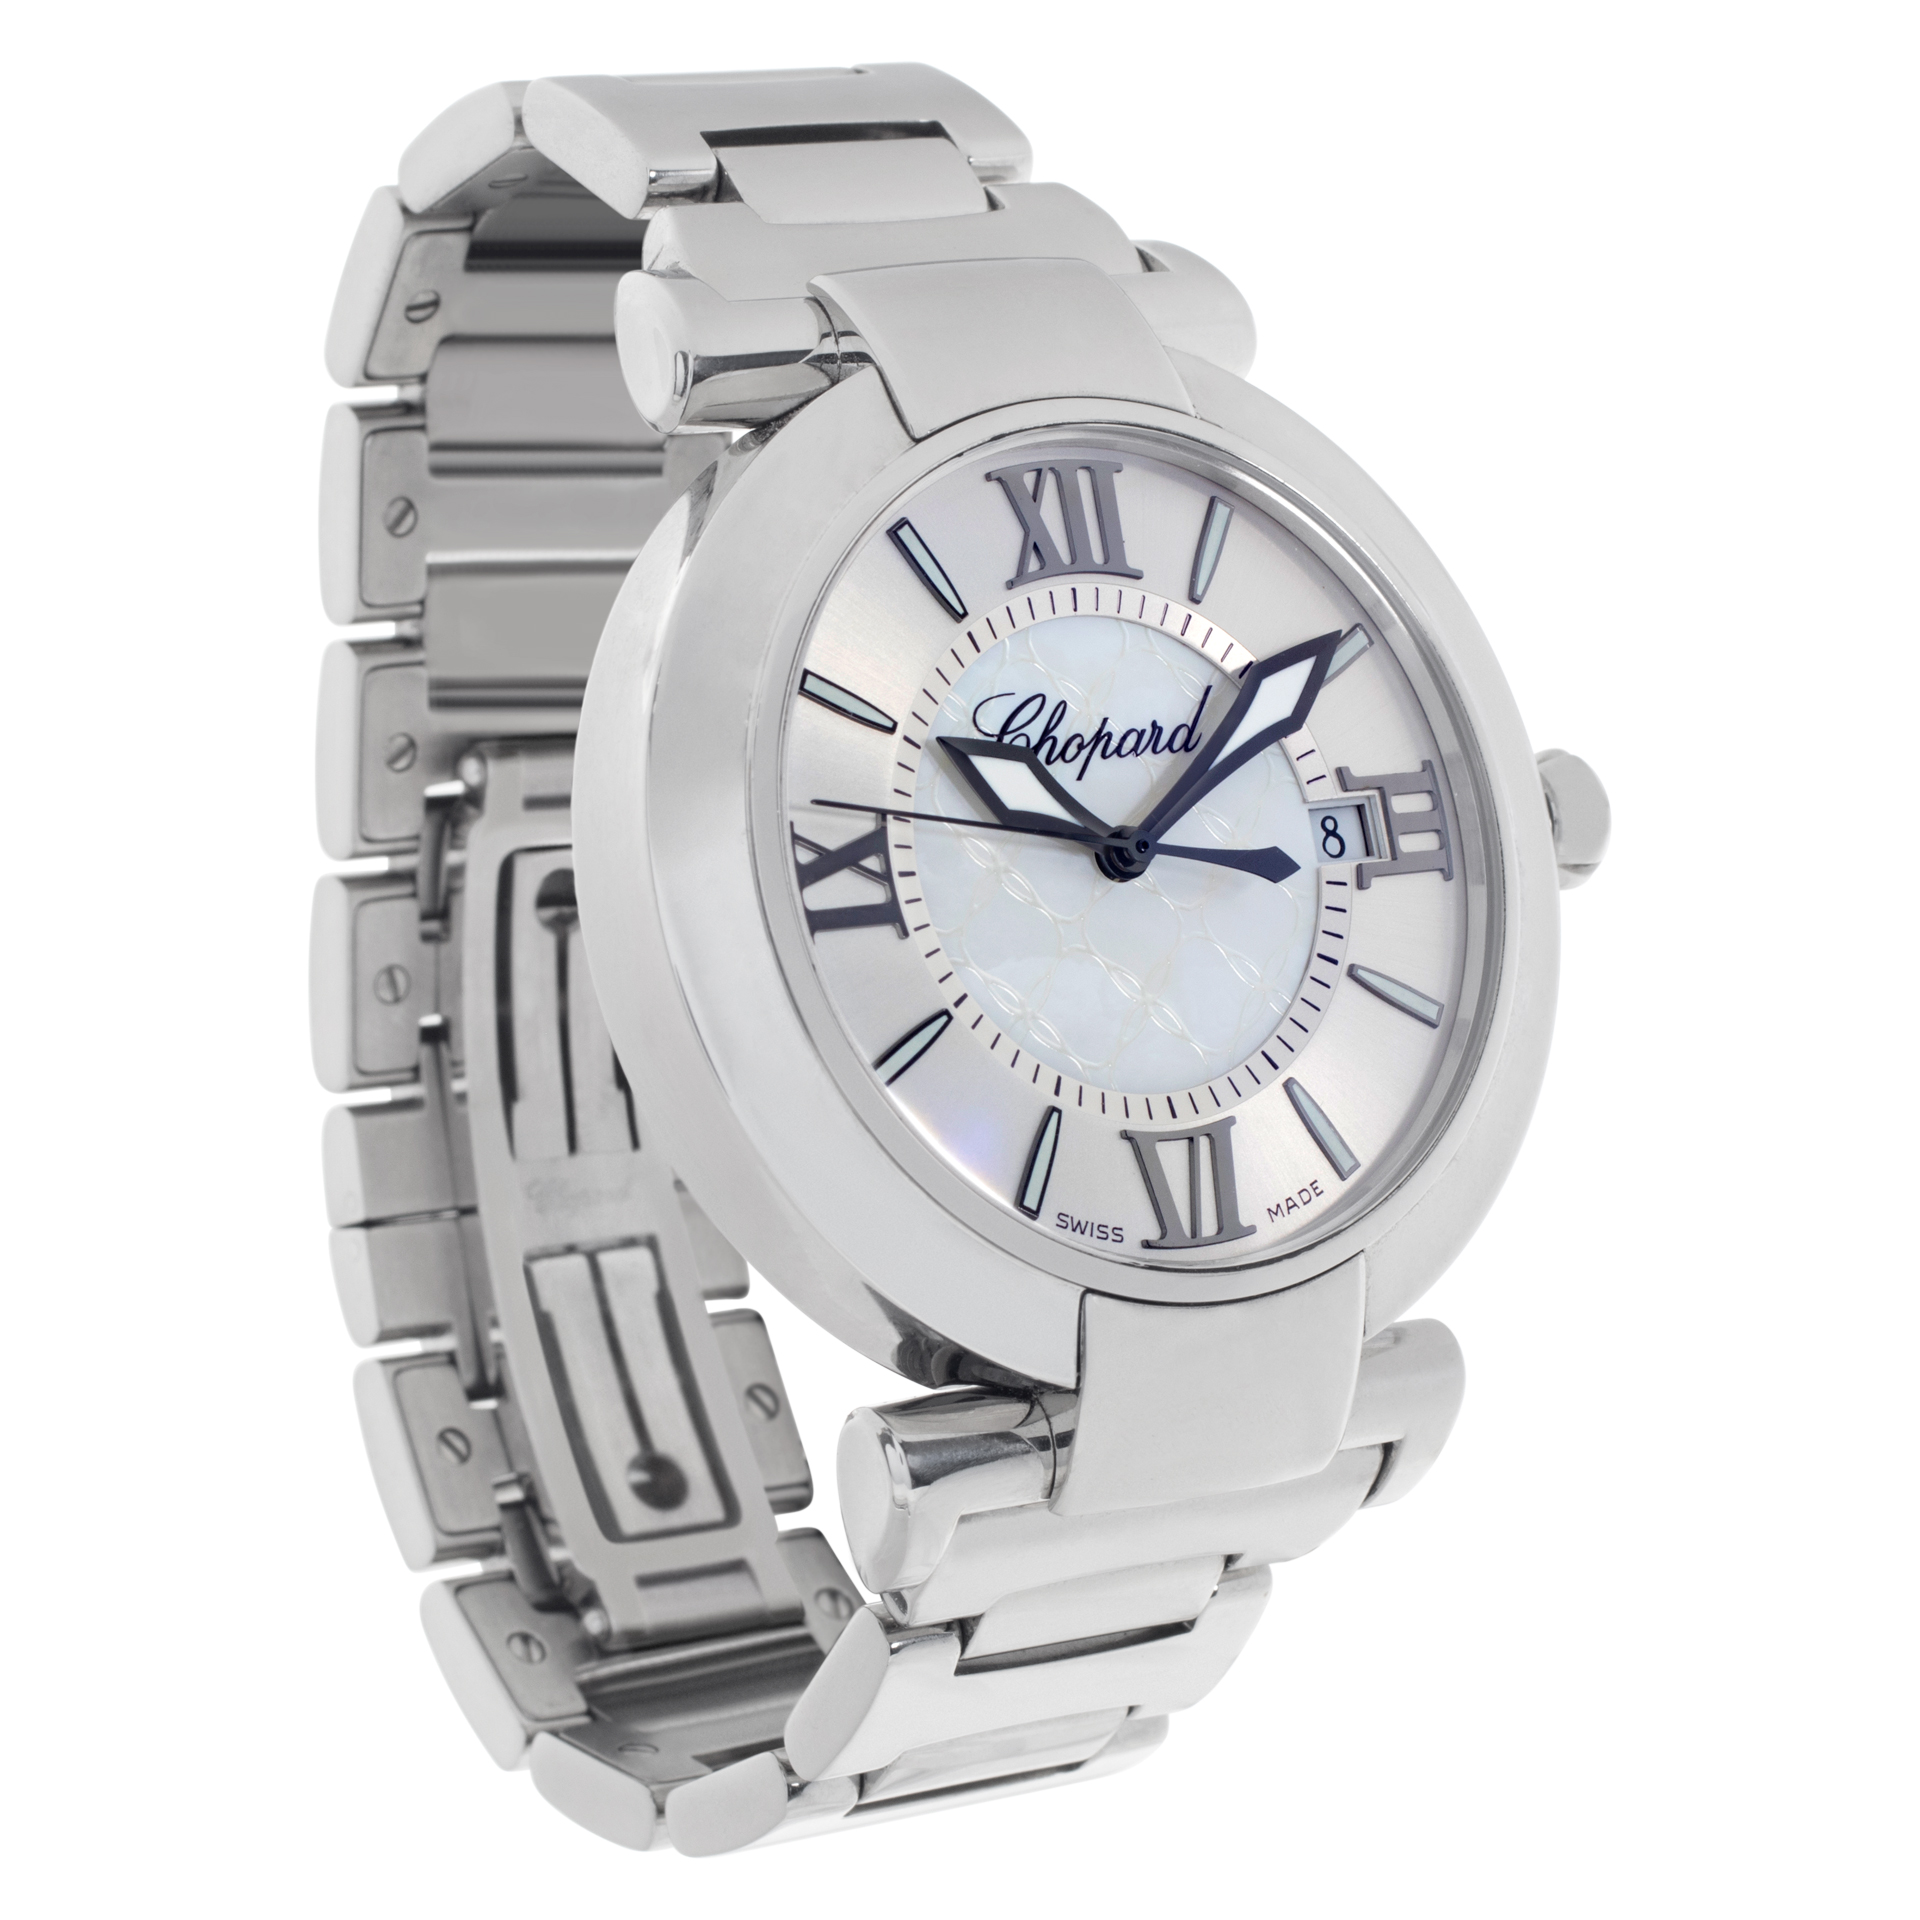 Chopard Imperiale 40mm 8531 image 3